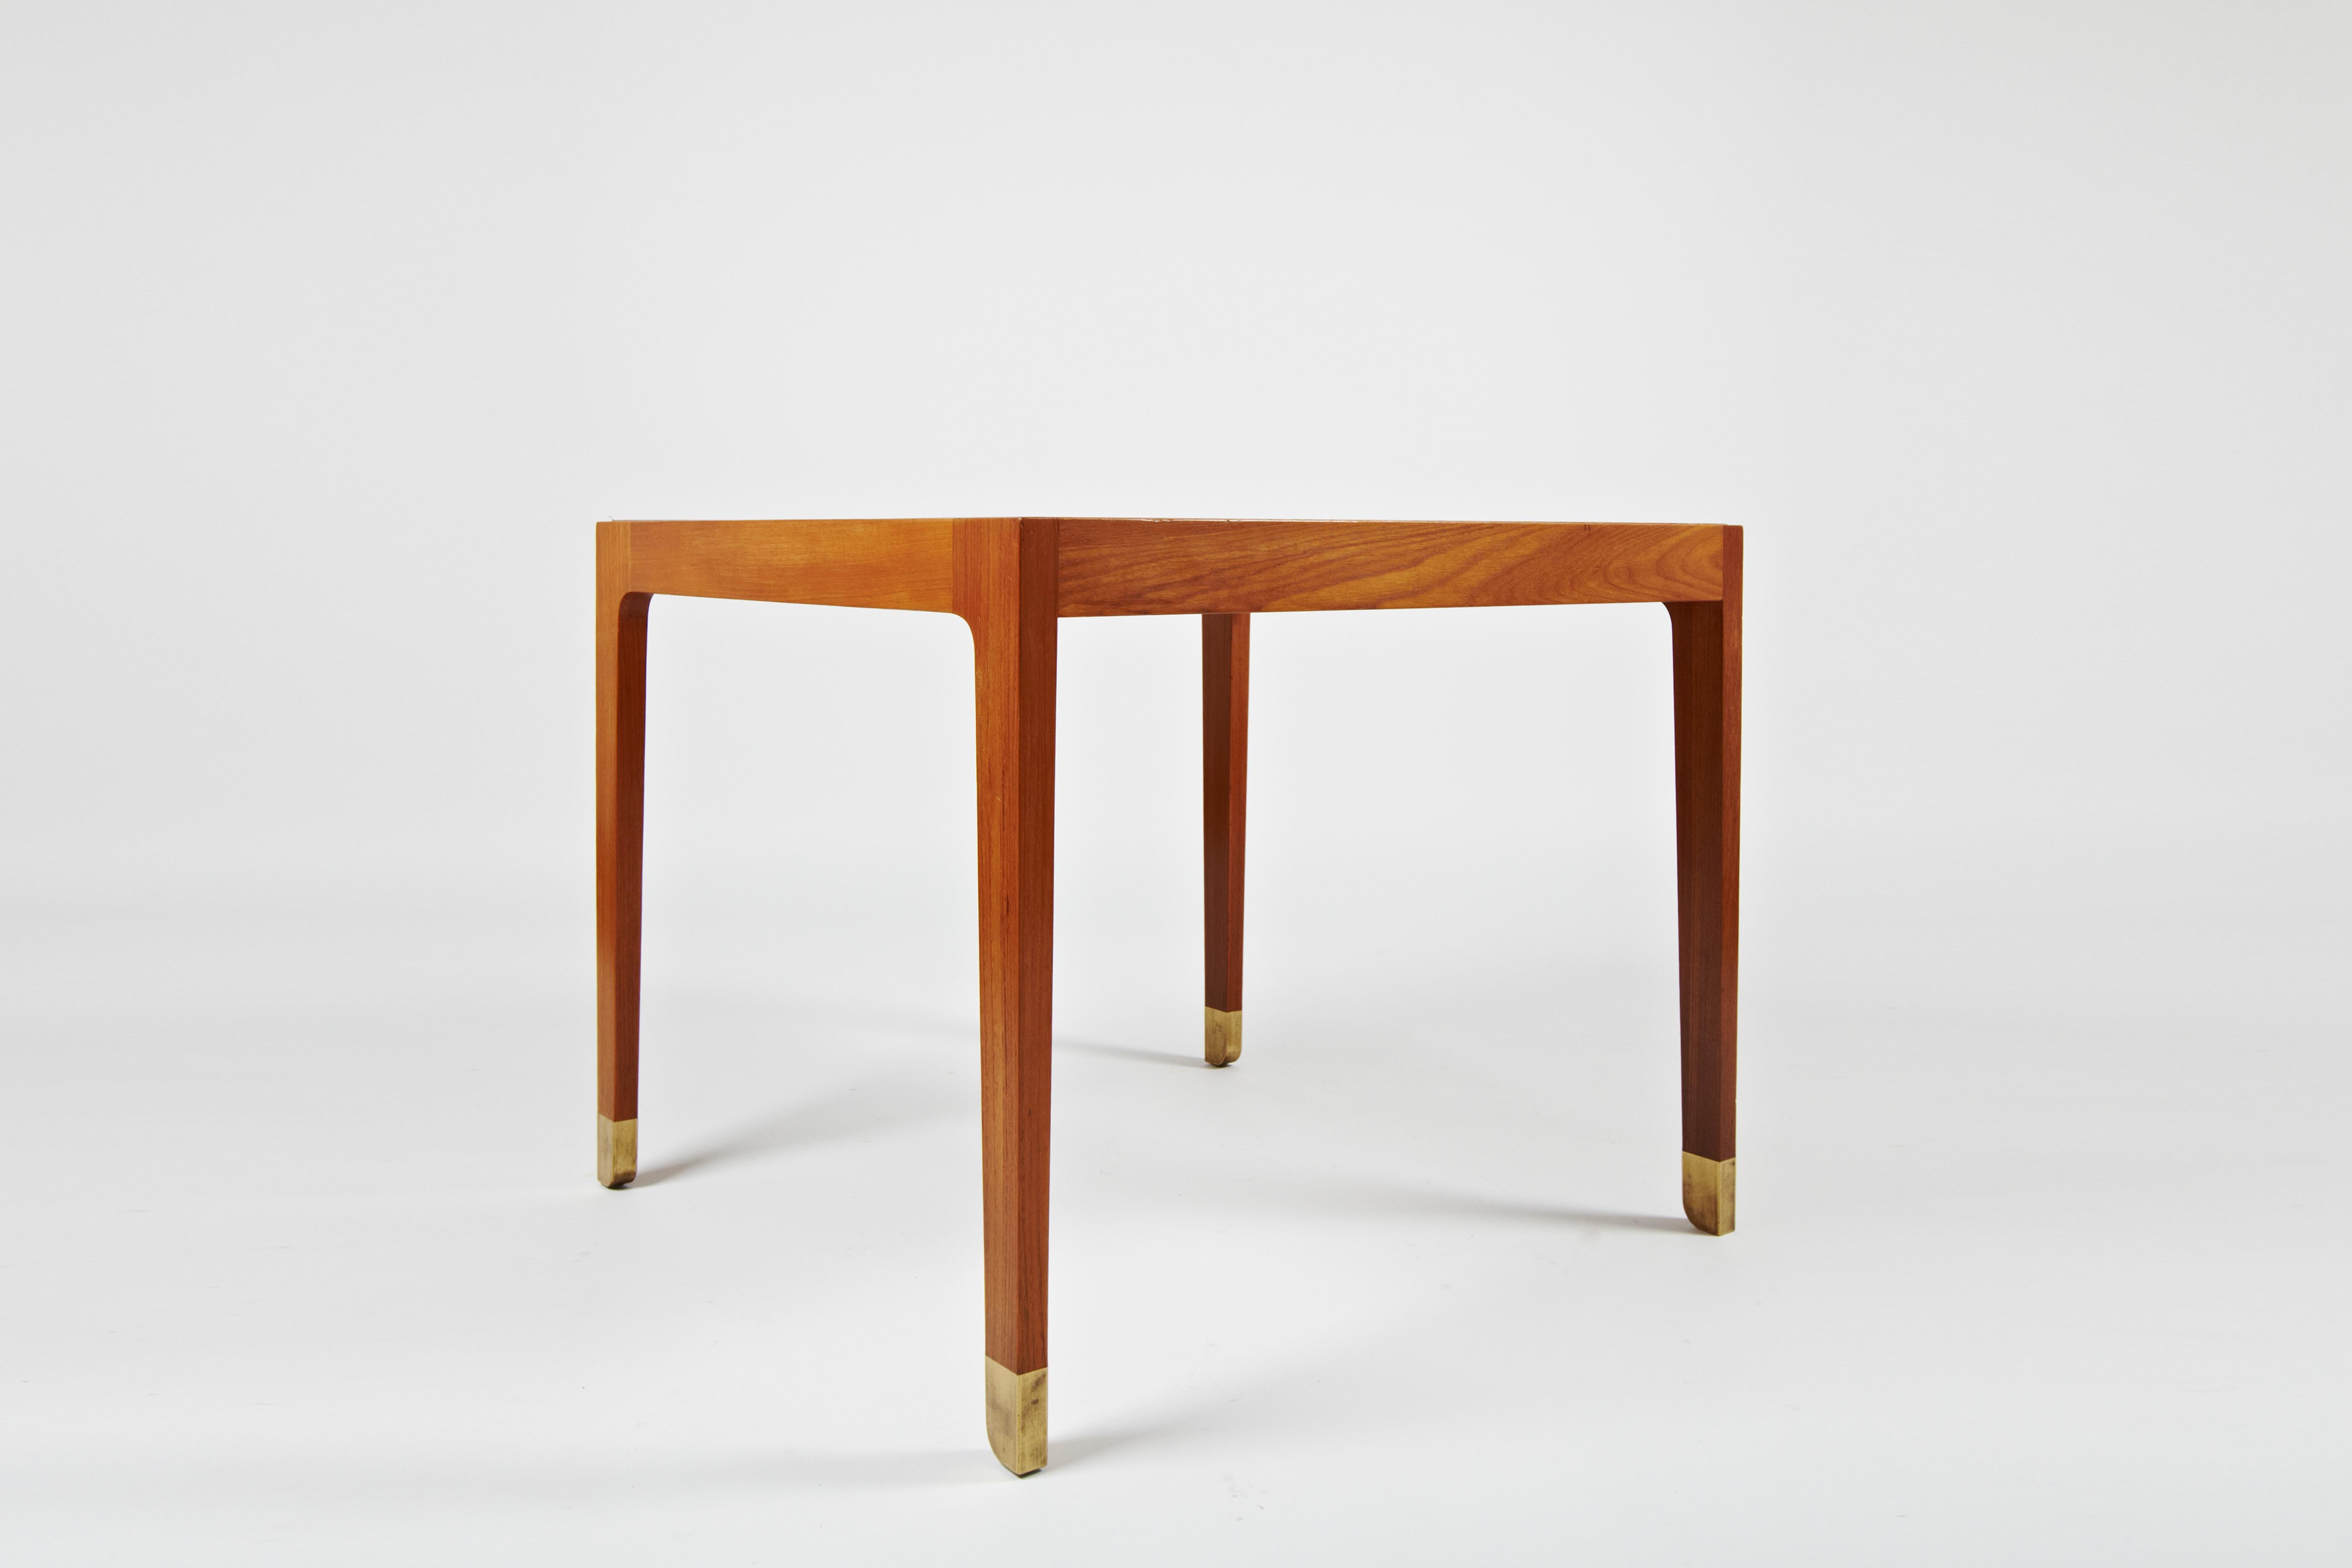 Finn Juhl: Pair of exhibition tables made 1947 - for dining or cards For Sale